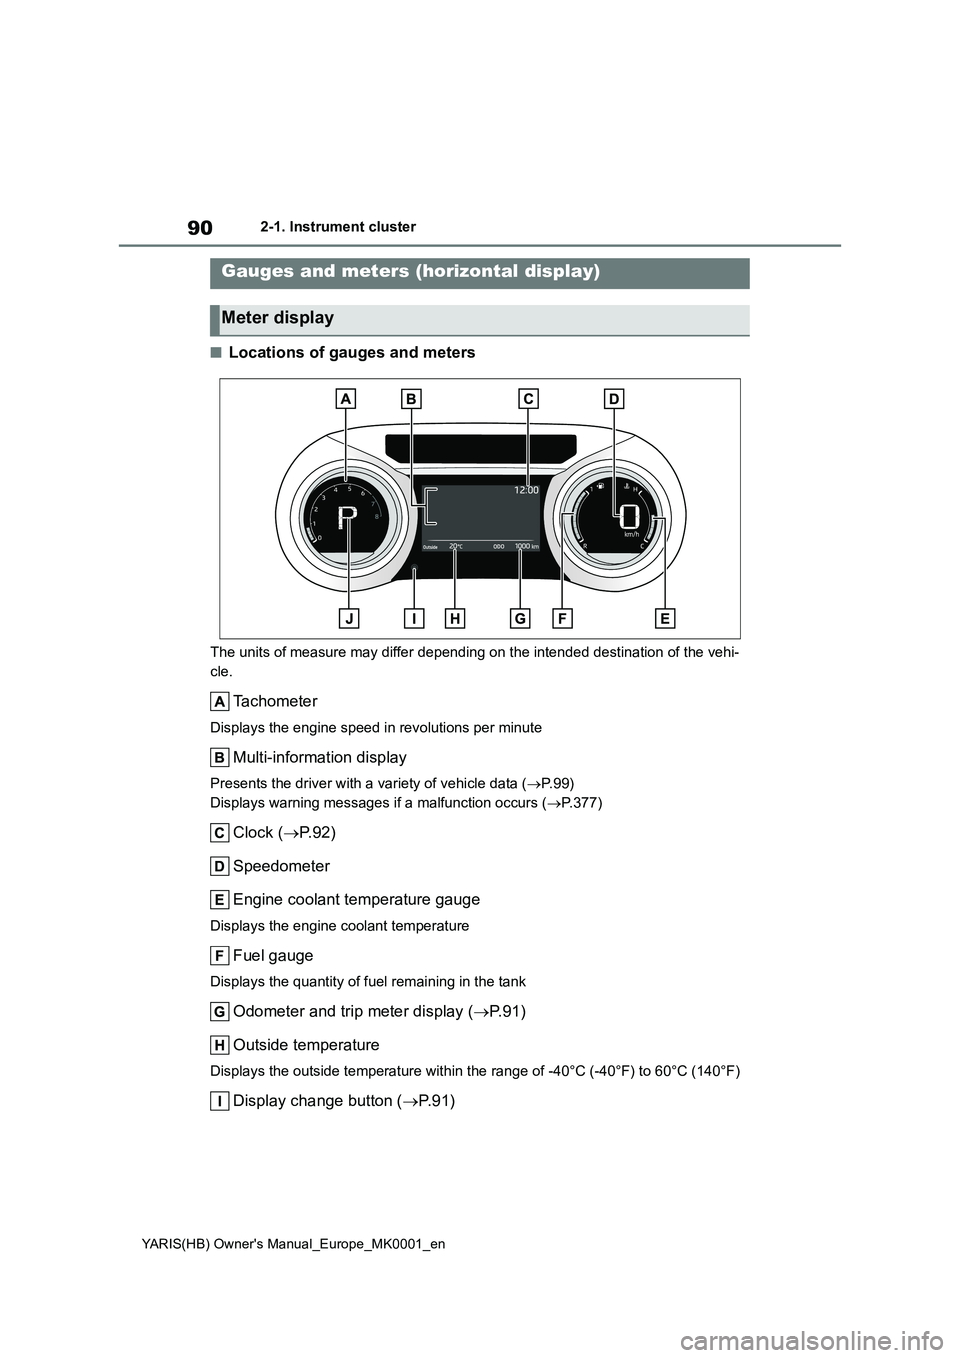 TOYOTA YARIS 2021  Owners Manual 90
YARIS(HB) Owners Manual_Europe_MK0001_en
2-1. Instrument cluster
■Locations of gauges and meters
The units of measure may differ depending on the intended destination of the vehi-
cle.
Tachomete